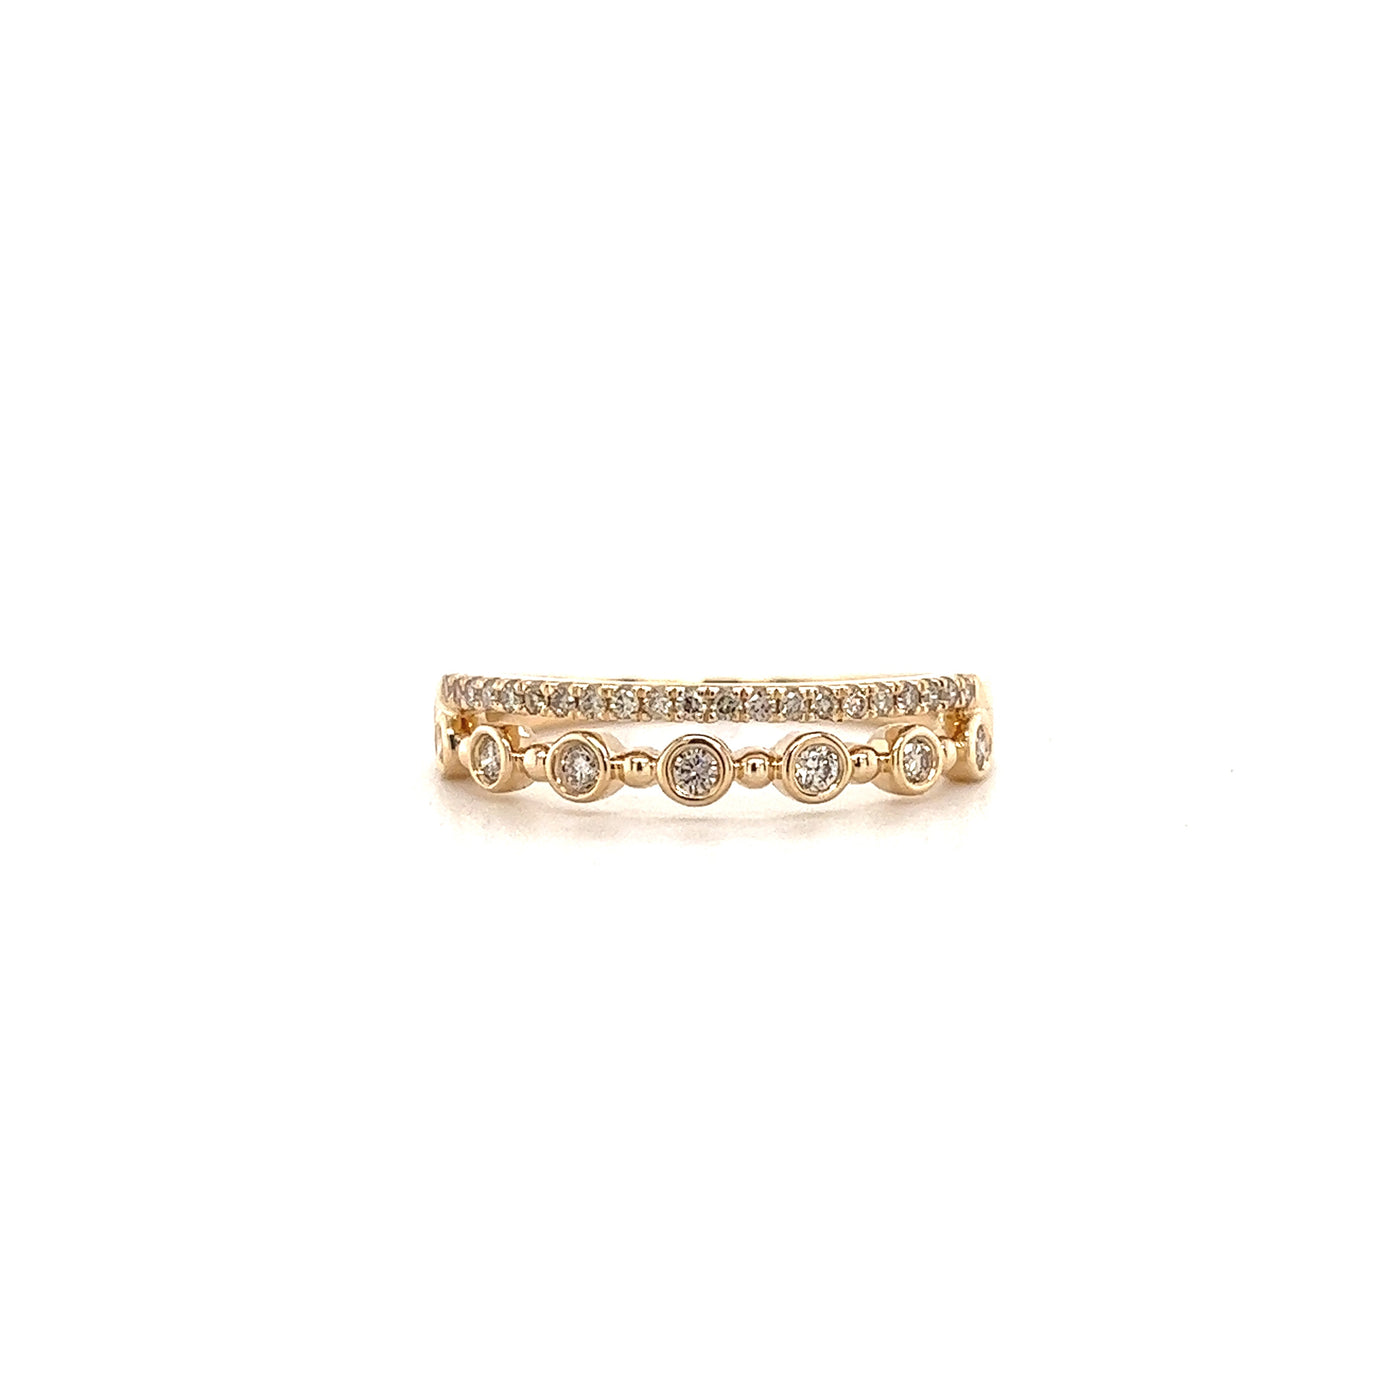 9ct gold double diamond stack featuring .25ct of diamonds